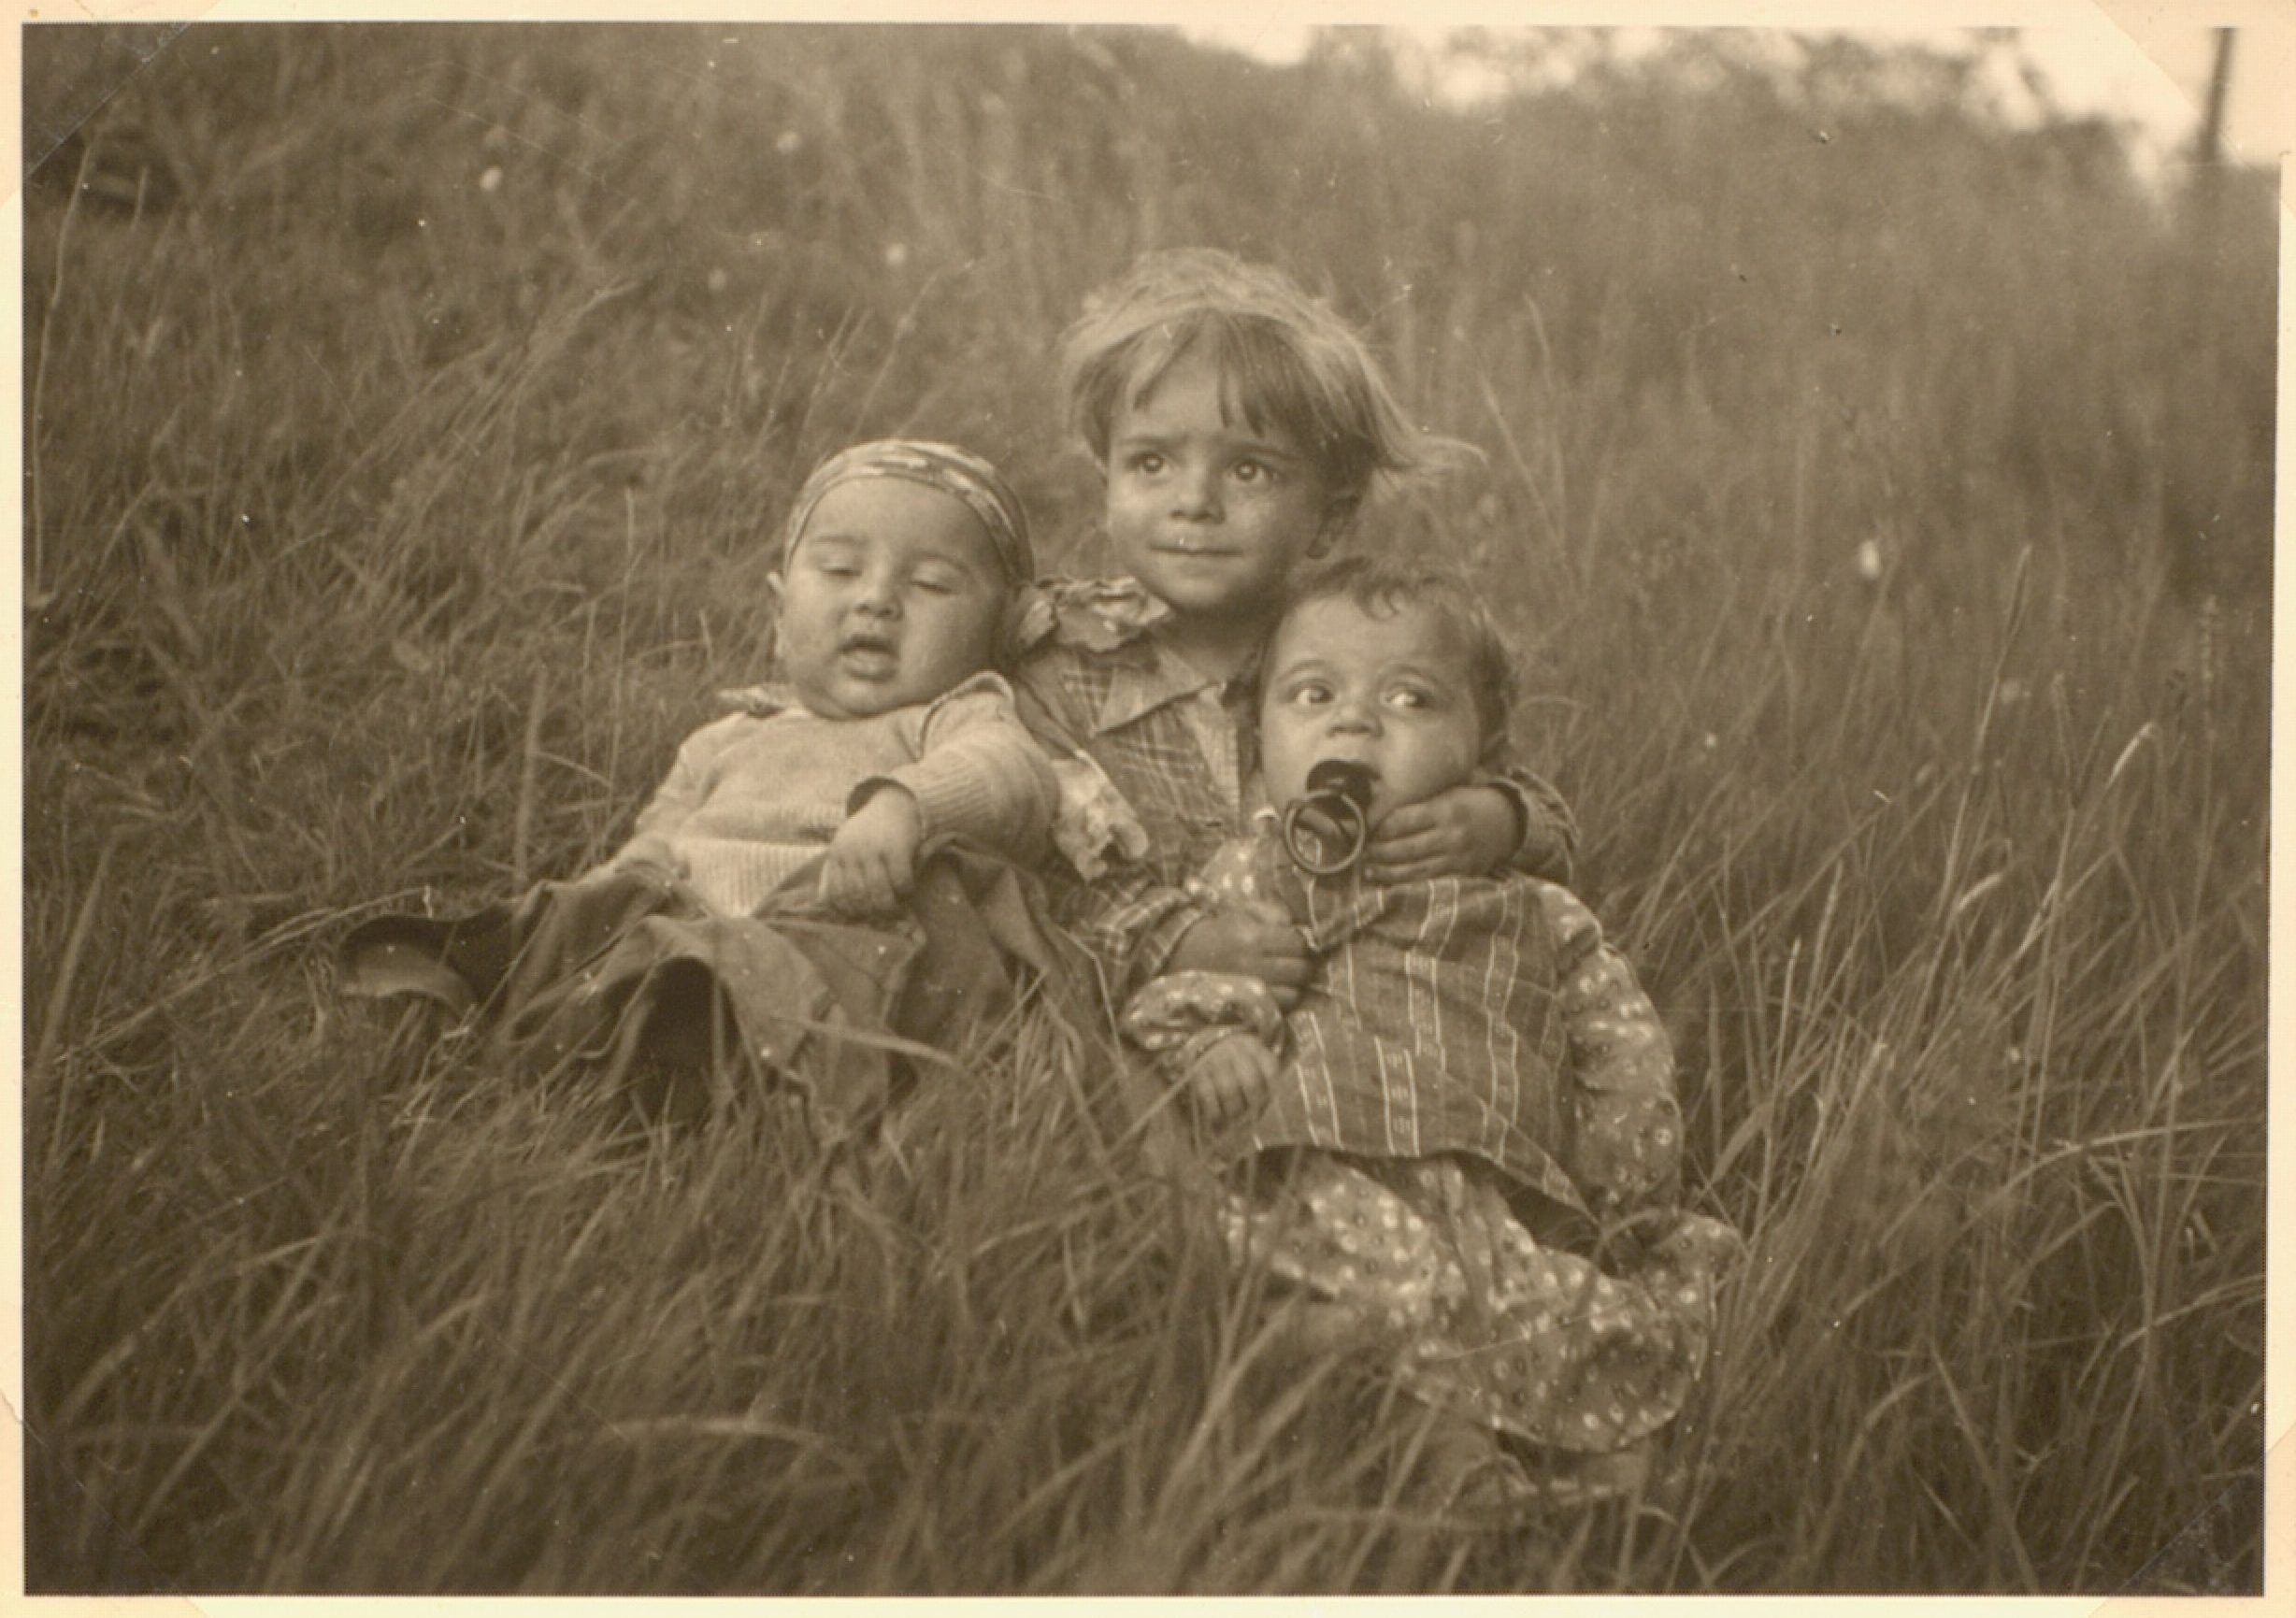 August, a Sinti boy (center), and relatives in Germany. August died in Auschwitz concentration camp, as almost certainly did the other children. (University of Liverpool, GLS Add GA 1 2)